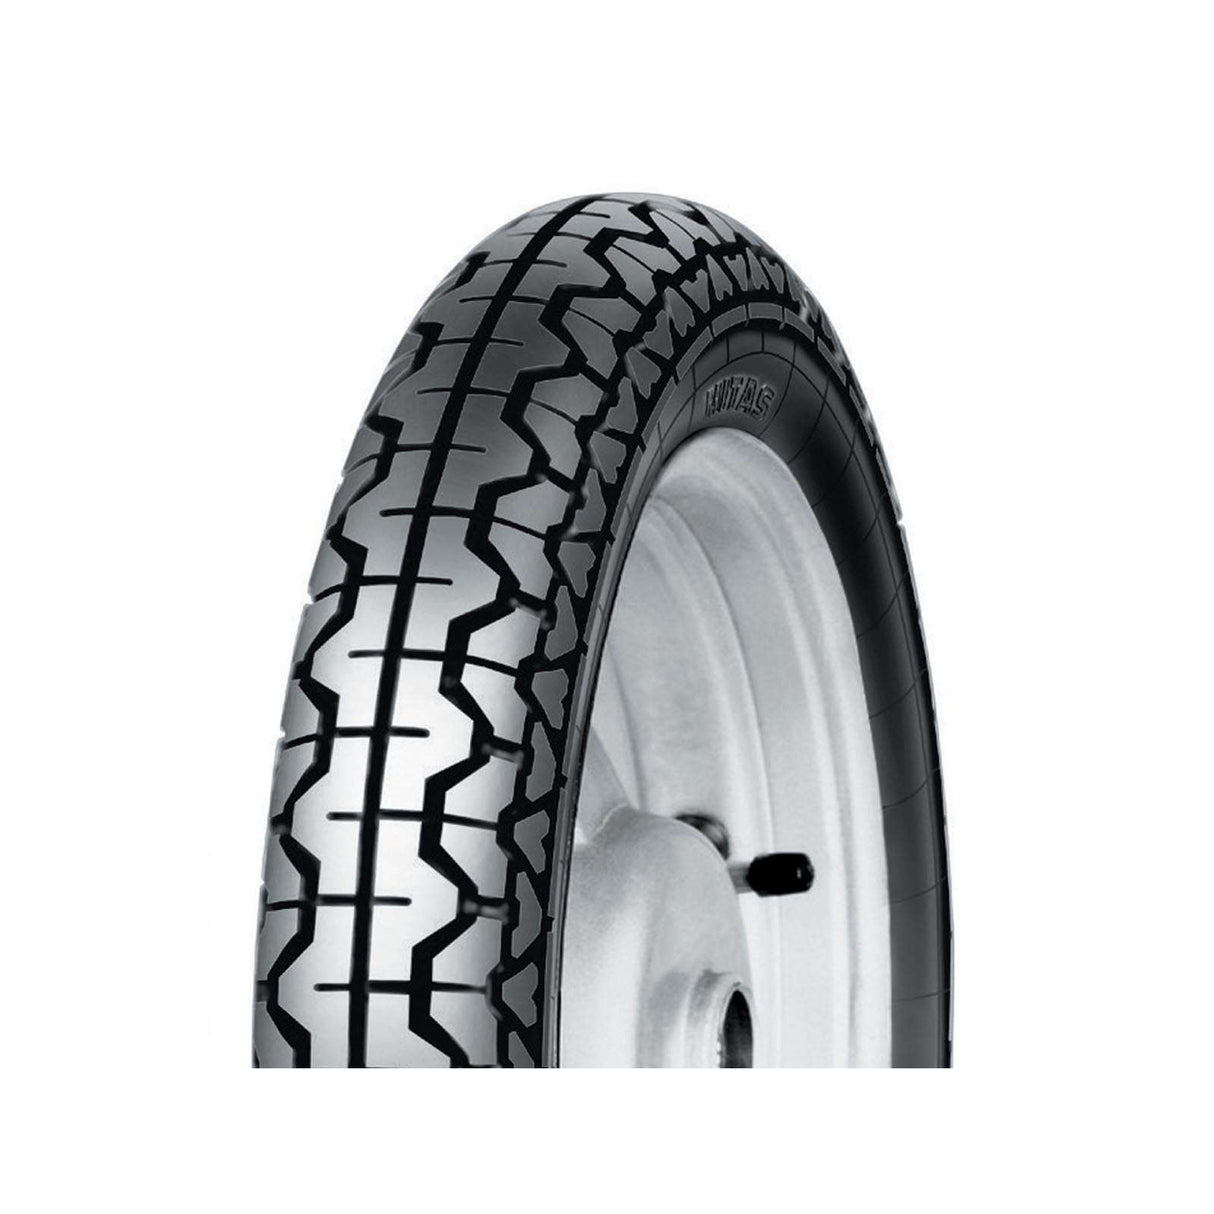 3.50-18 H06 Classic Reinf. Mitas Highway Tyre